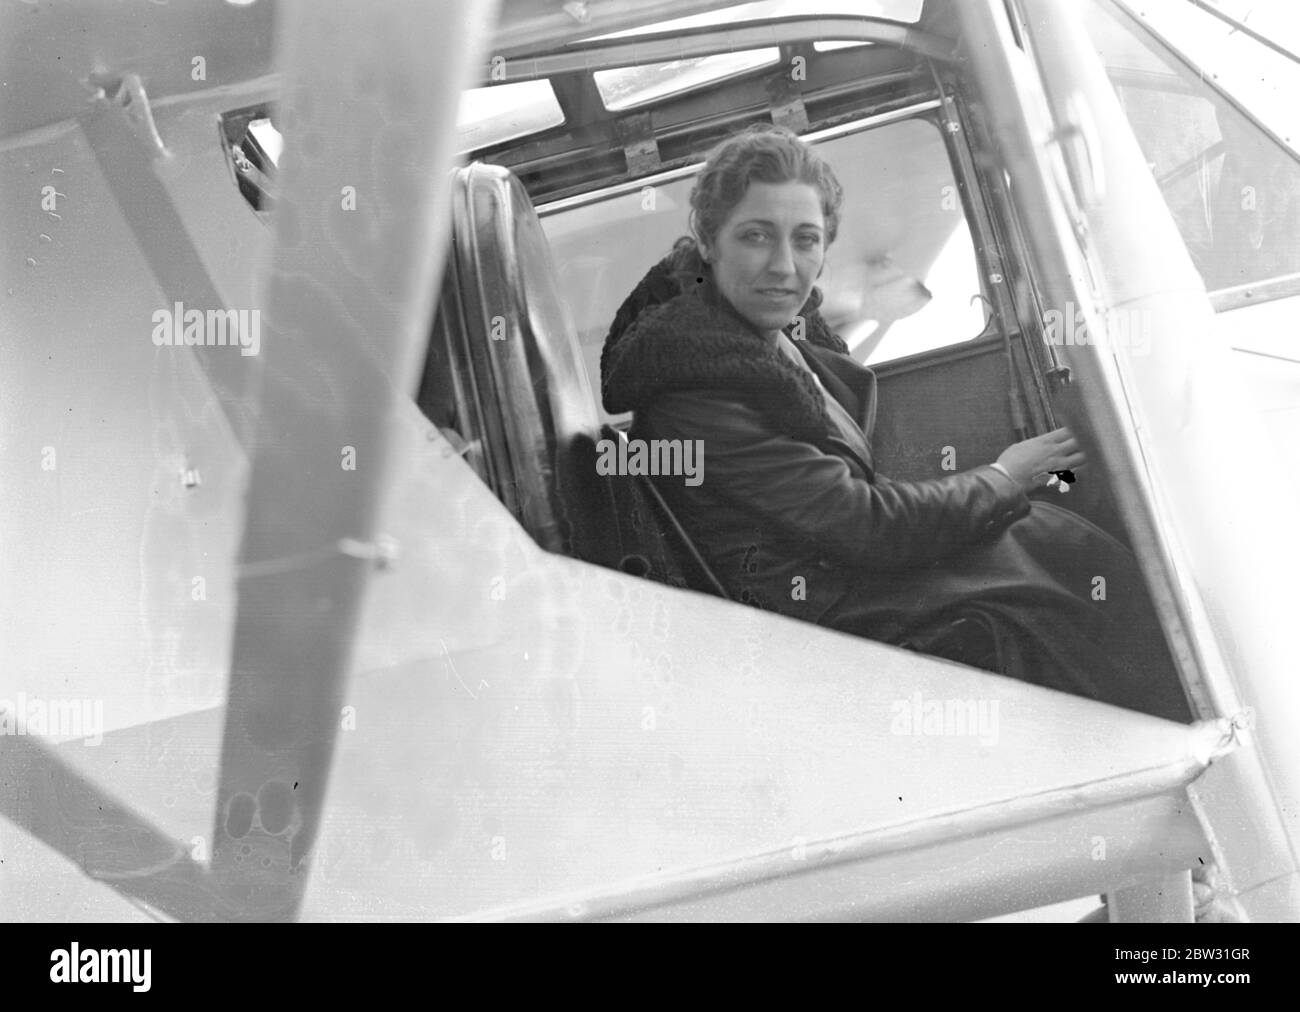 AMy Johnson ( Mrs Mollison ) leaves Stag Lane on first hop of her record flight to the cape . Mrs Mollison , the former Miss Amy Johnson , took off from Stag Lane aerodrome , near London , on the first stage of her record breaking flight to Cape Town in an effort to beat the record set up by her husband . The actual flight will start from Lympne . Mr J A Mollison accompanied her in his plane ' The Heart ' s Content ' as fsar as Lympne . Mrrs Mollison with her topee and flying maps beside her plane at Stag Lane before the take off . 8 November 1932 Stock Photo